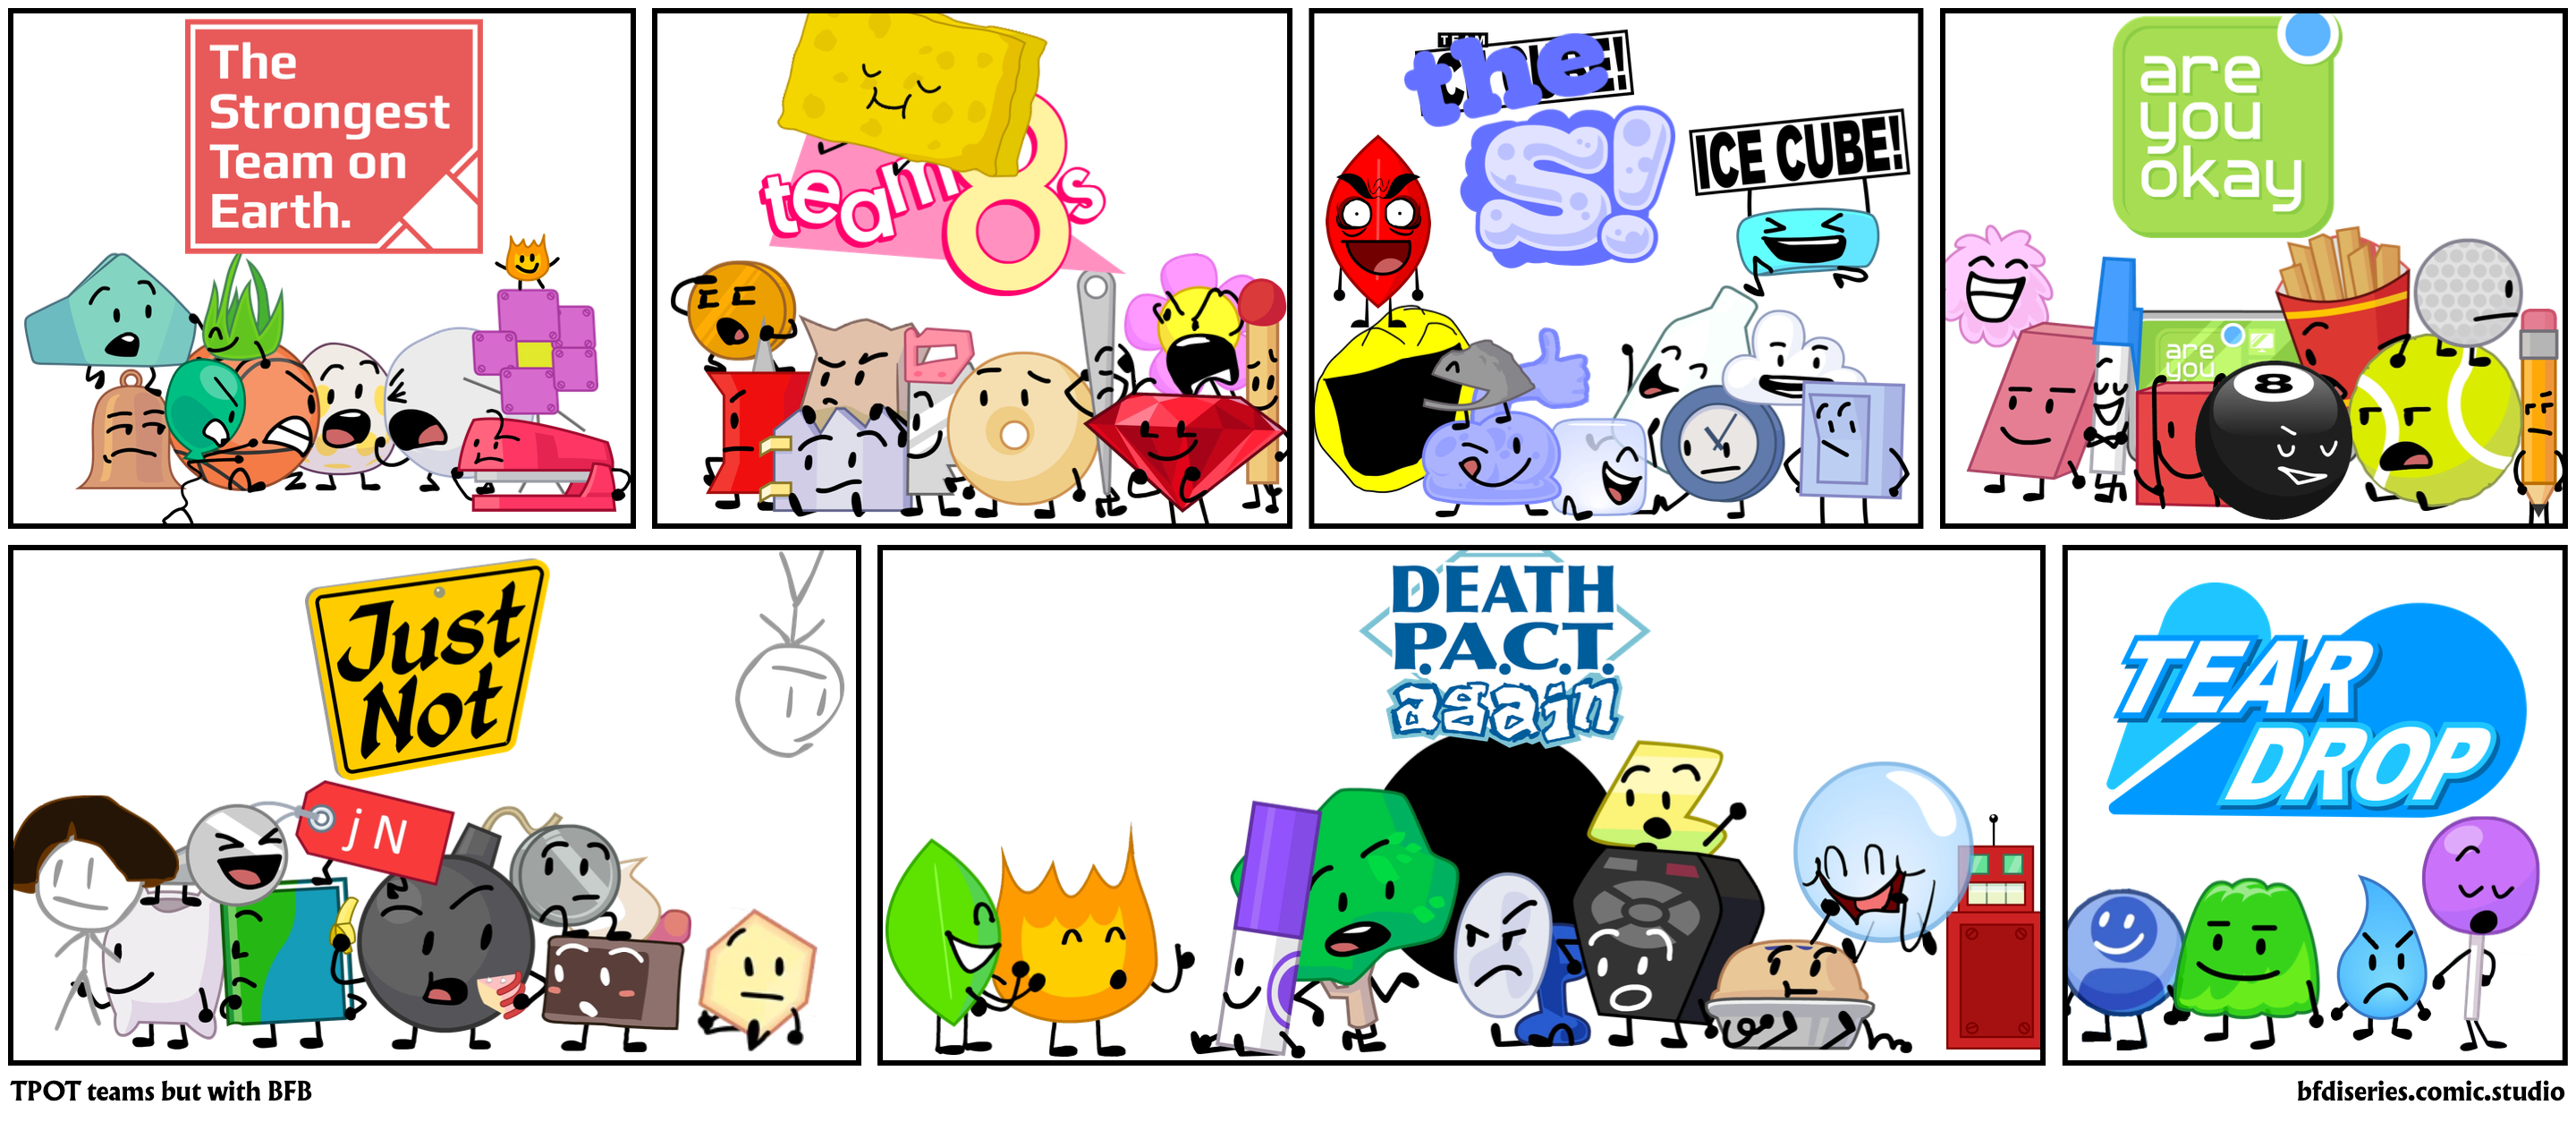 TPOT teams but with BFB